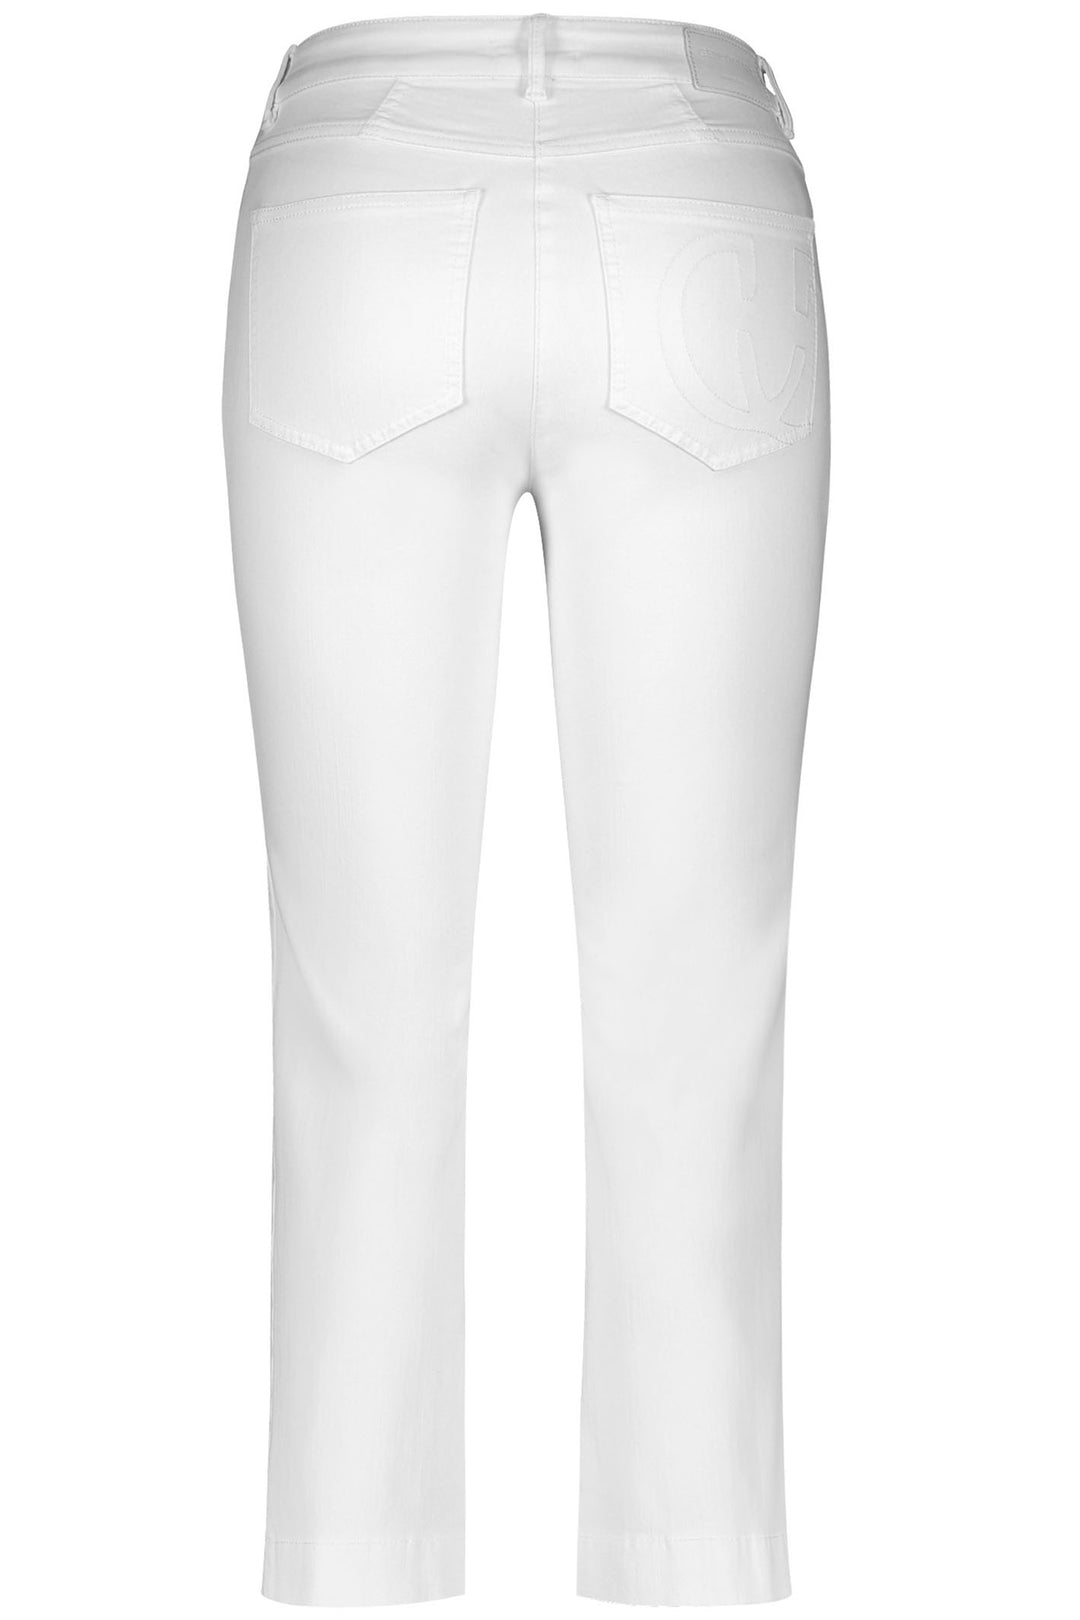 Gerry Weber 925046 31600 Off White Straight Leg Jeans - Experience Boutique